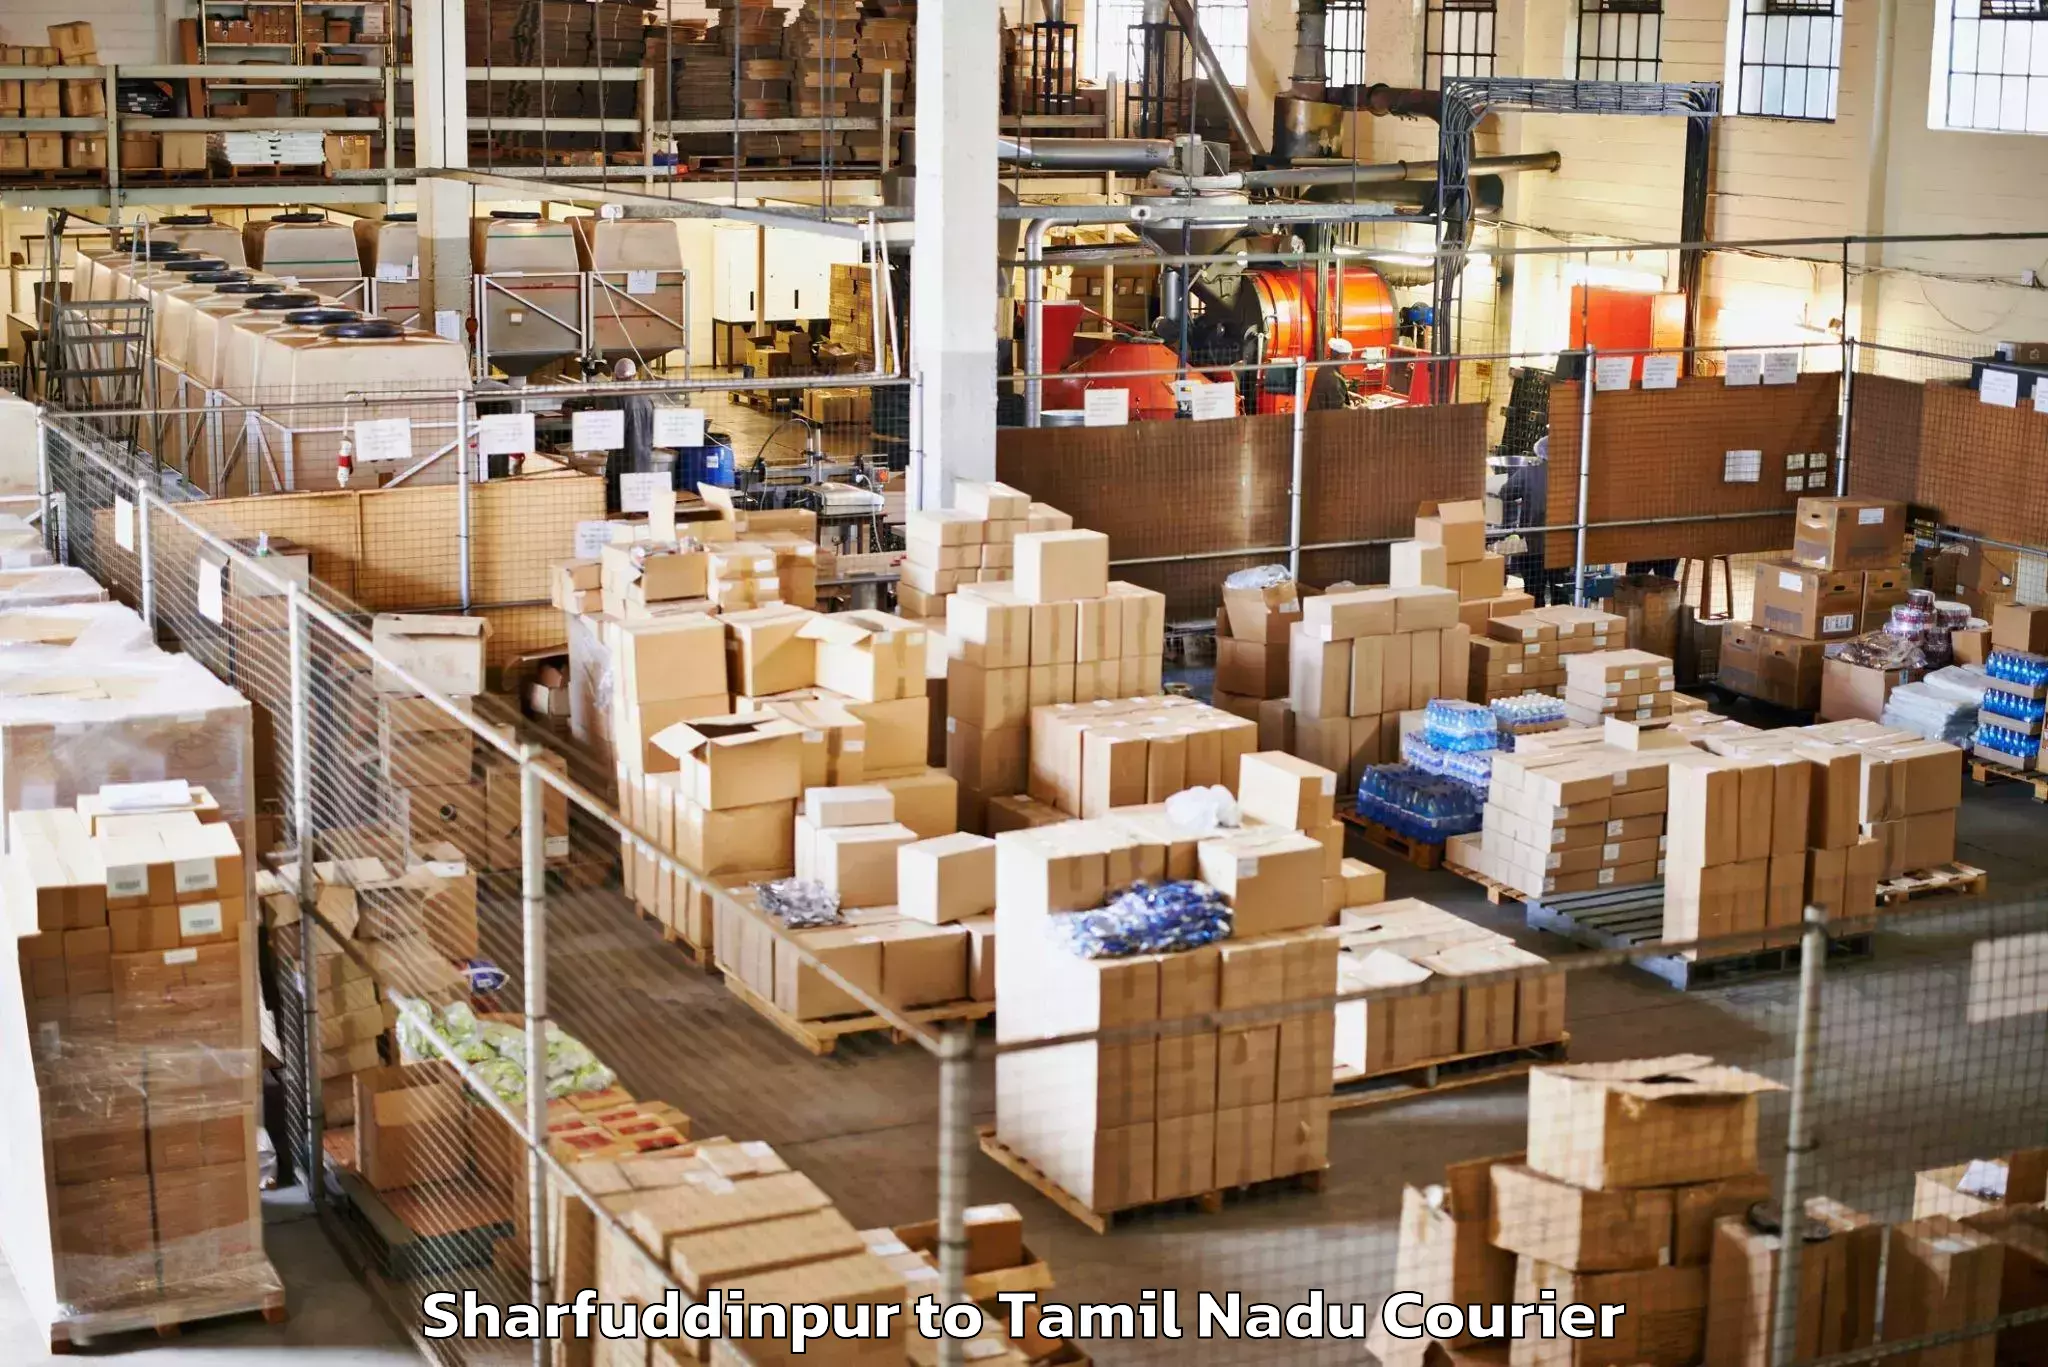 Baggage shipping schedule Sharfuddinpur to Chetpet